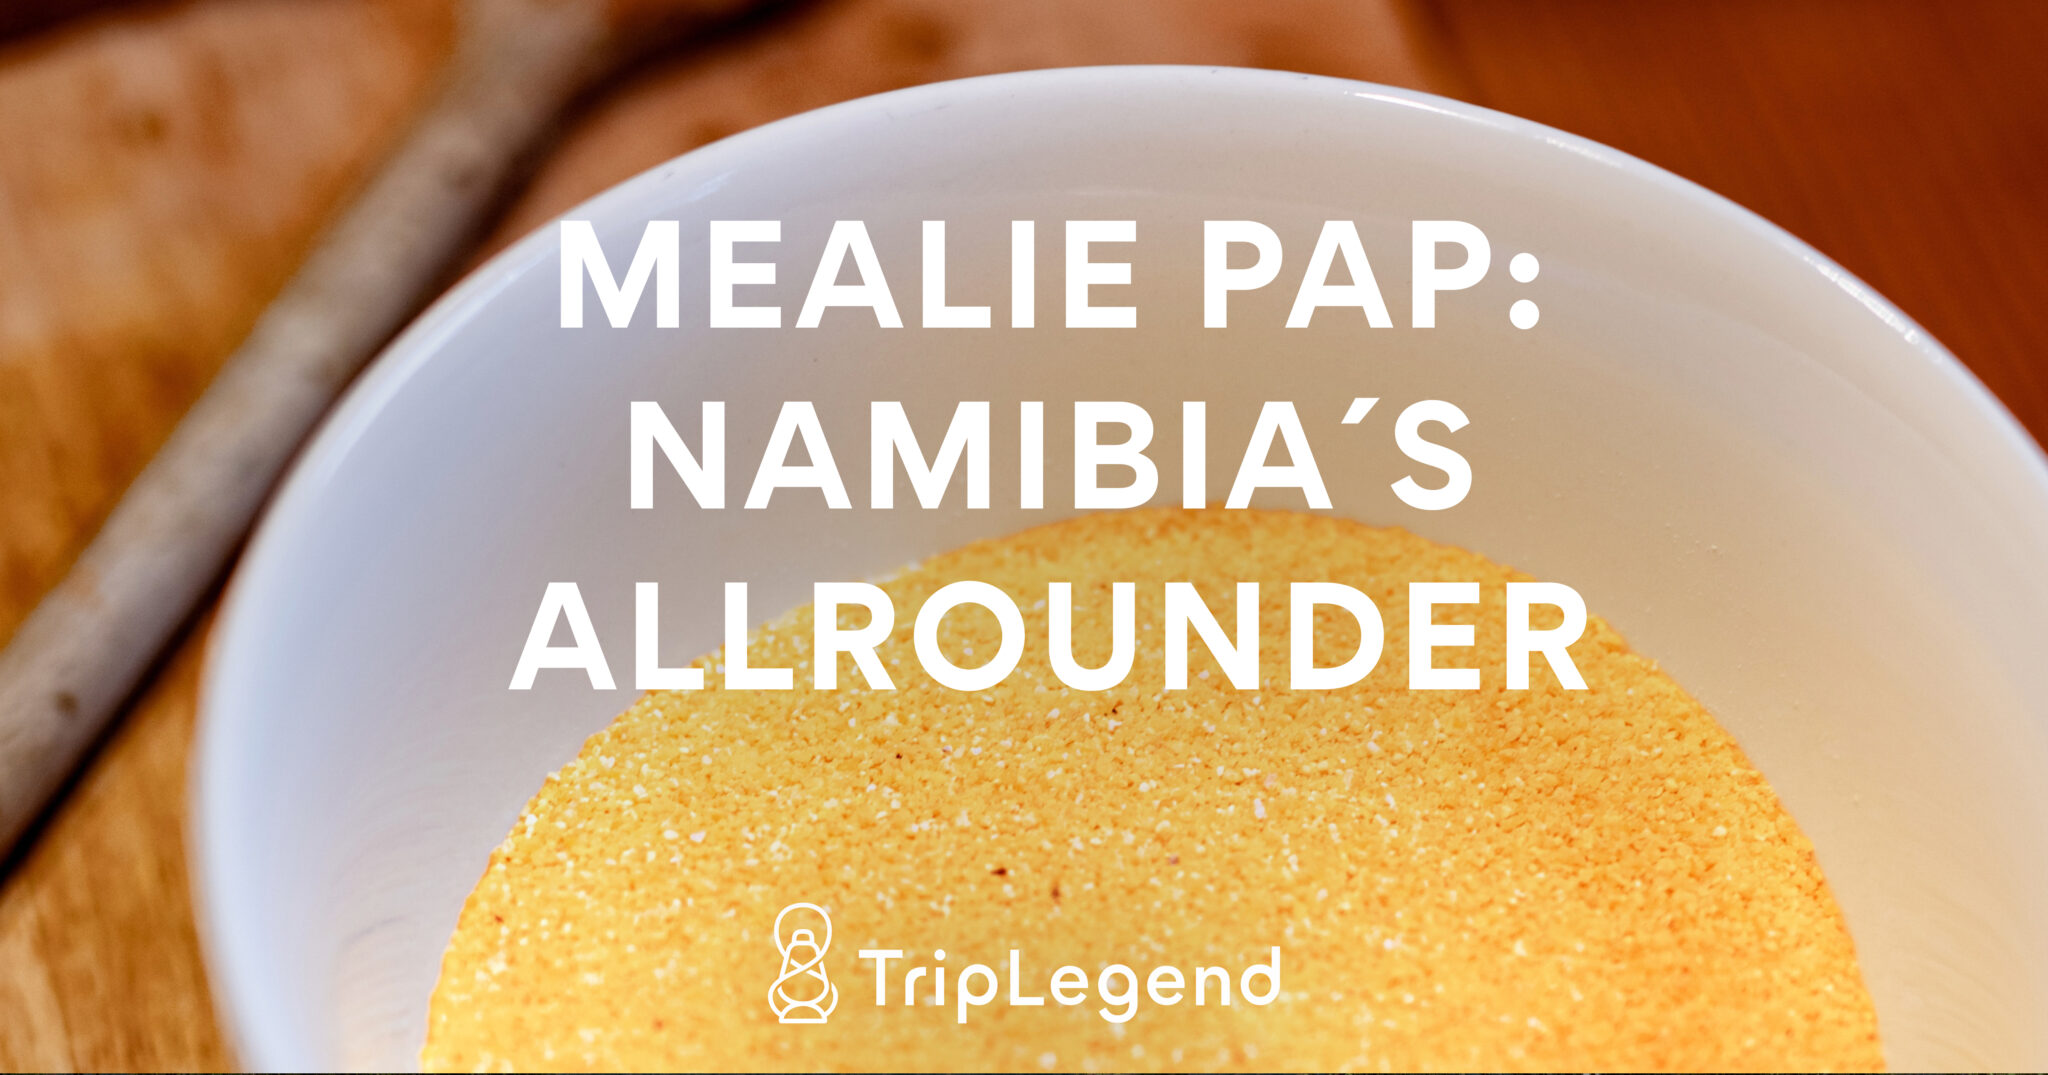 Mealie Pap Namibia's all-rounder Cover picture Scaled